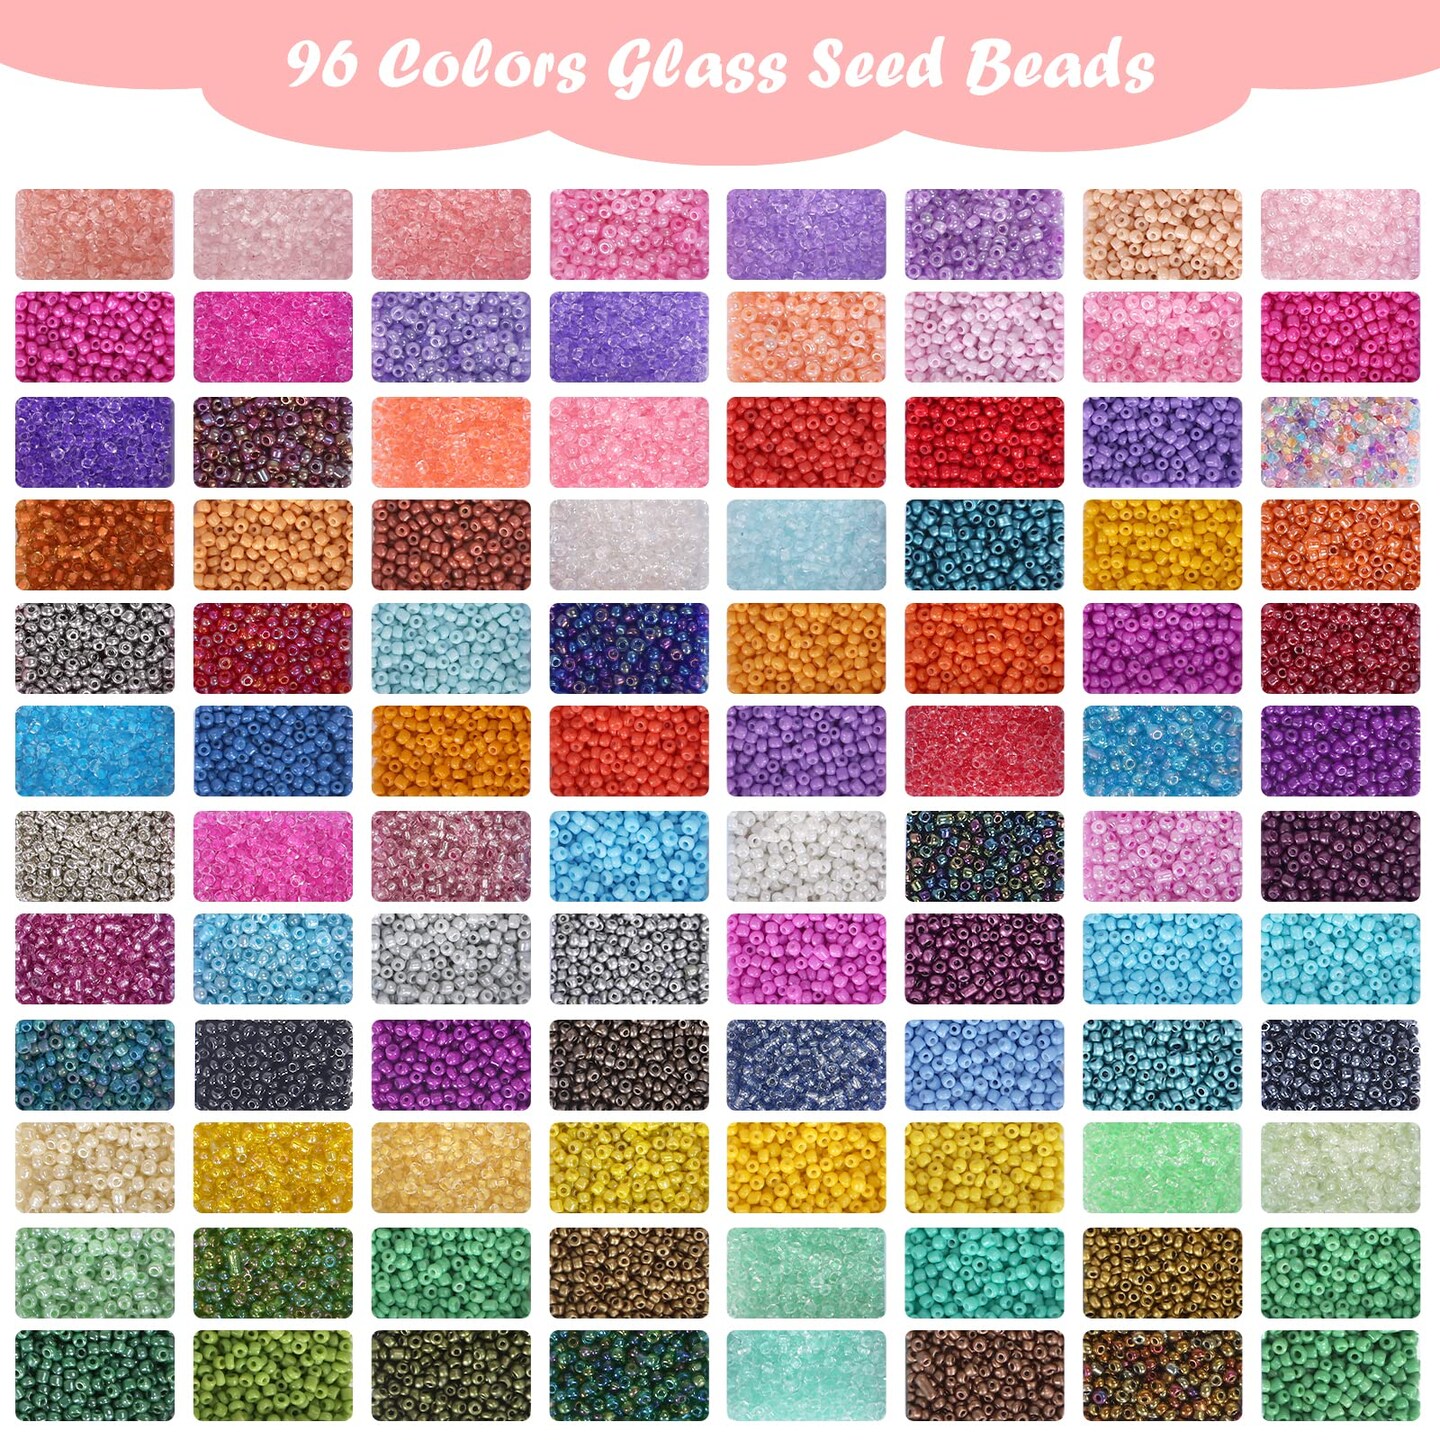 Quefe QUEFE 9600pcs 4mm Glass Seed Beads Kit for Jewelry Making, 96 Colors  Beads with Pendant Charms and Letter Beads for Bracelets Ne